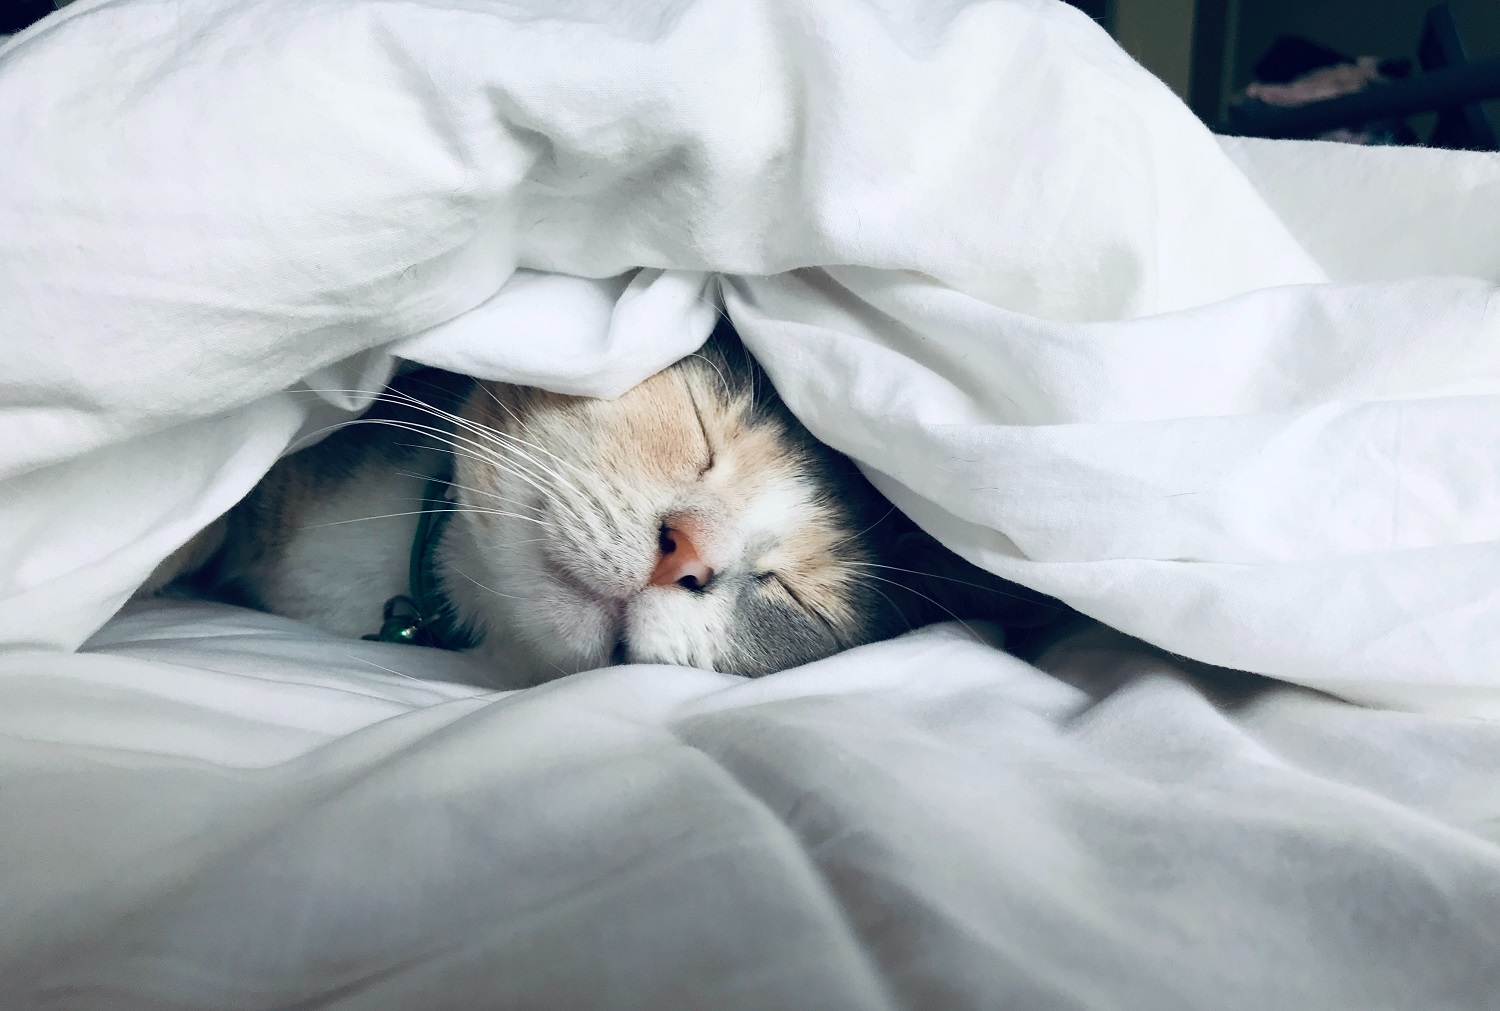 How do cats breathe under blankets?